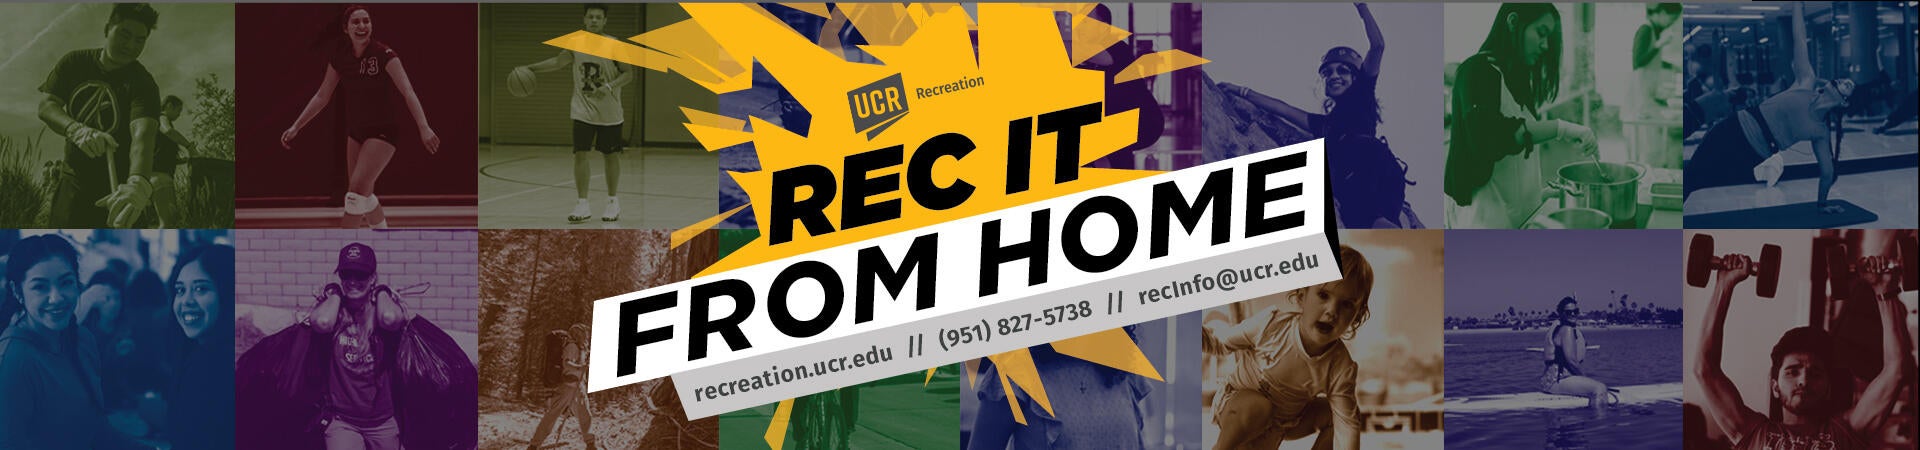 REC It From Home: RECREATION.UCR.EDU